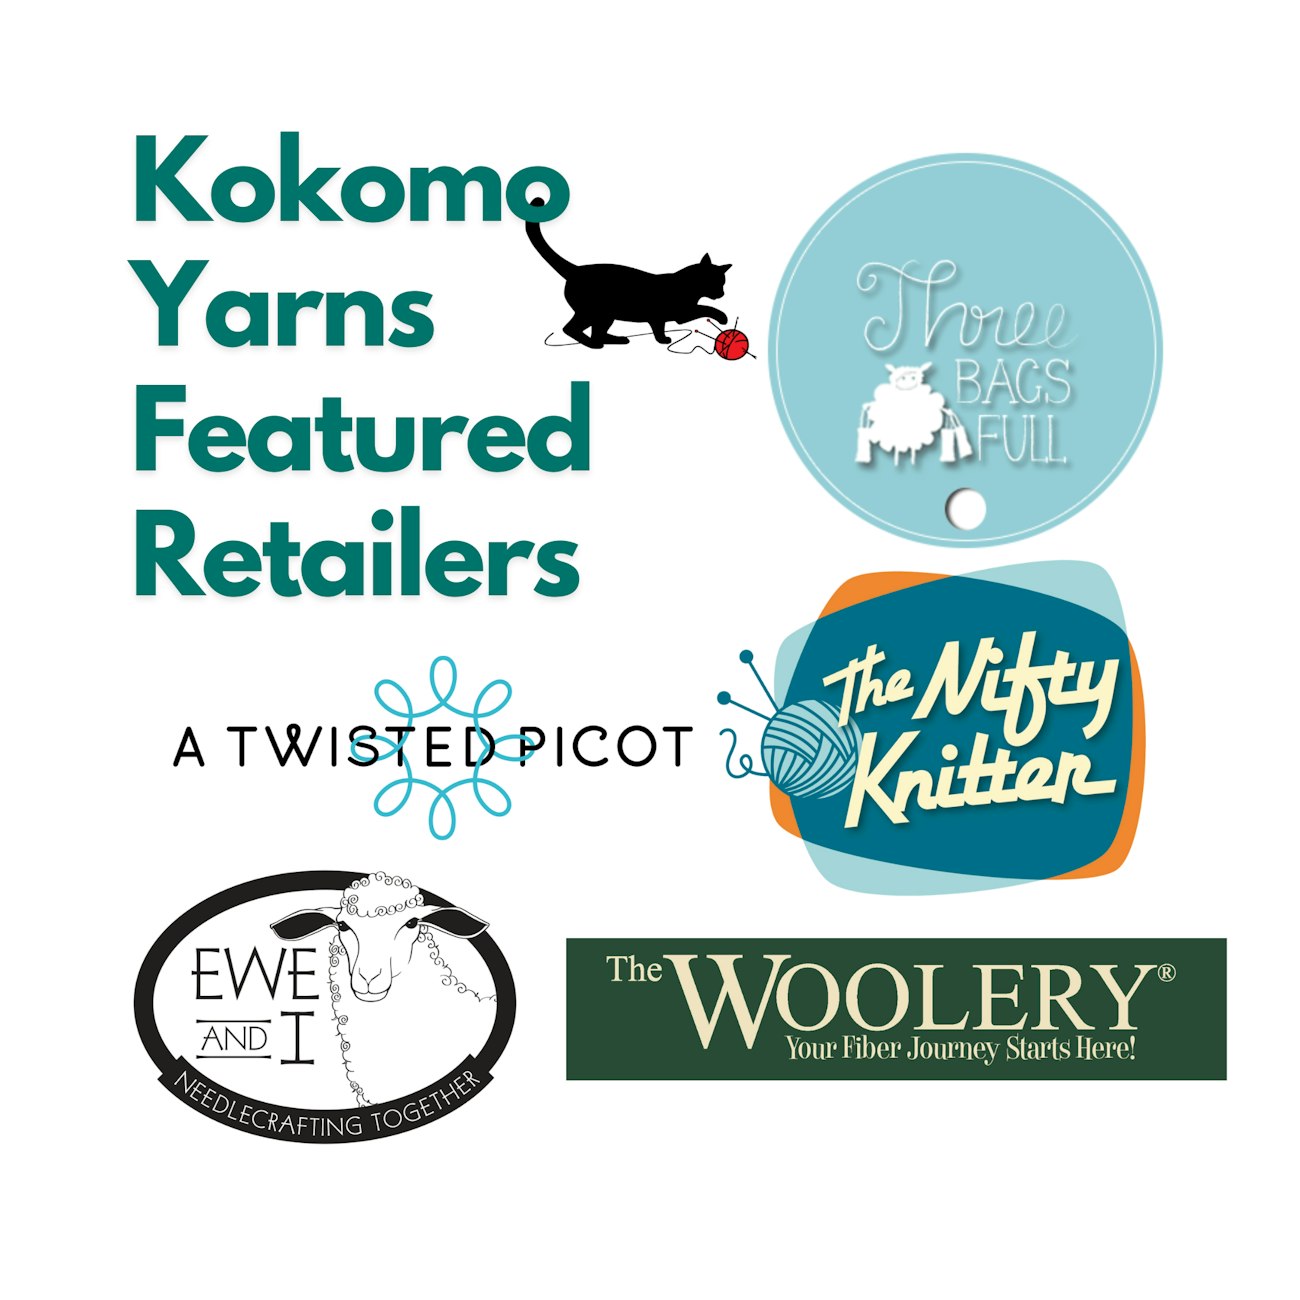 Kokomo Yarns featured retailers: Three Bags Full. The Nifty Knitter, A Twisted Picot, Ewe and I, and The Woolery